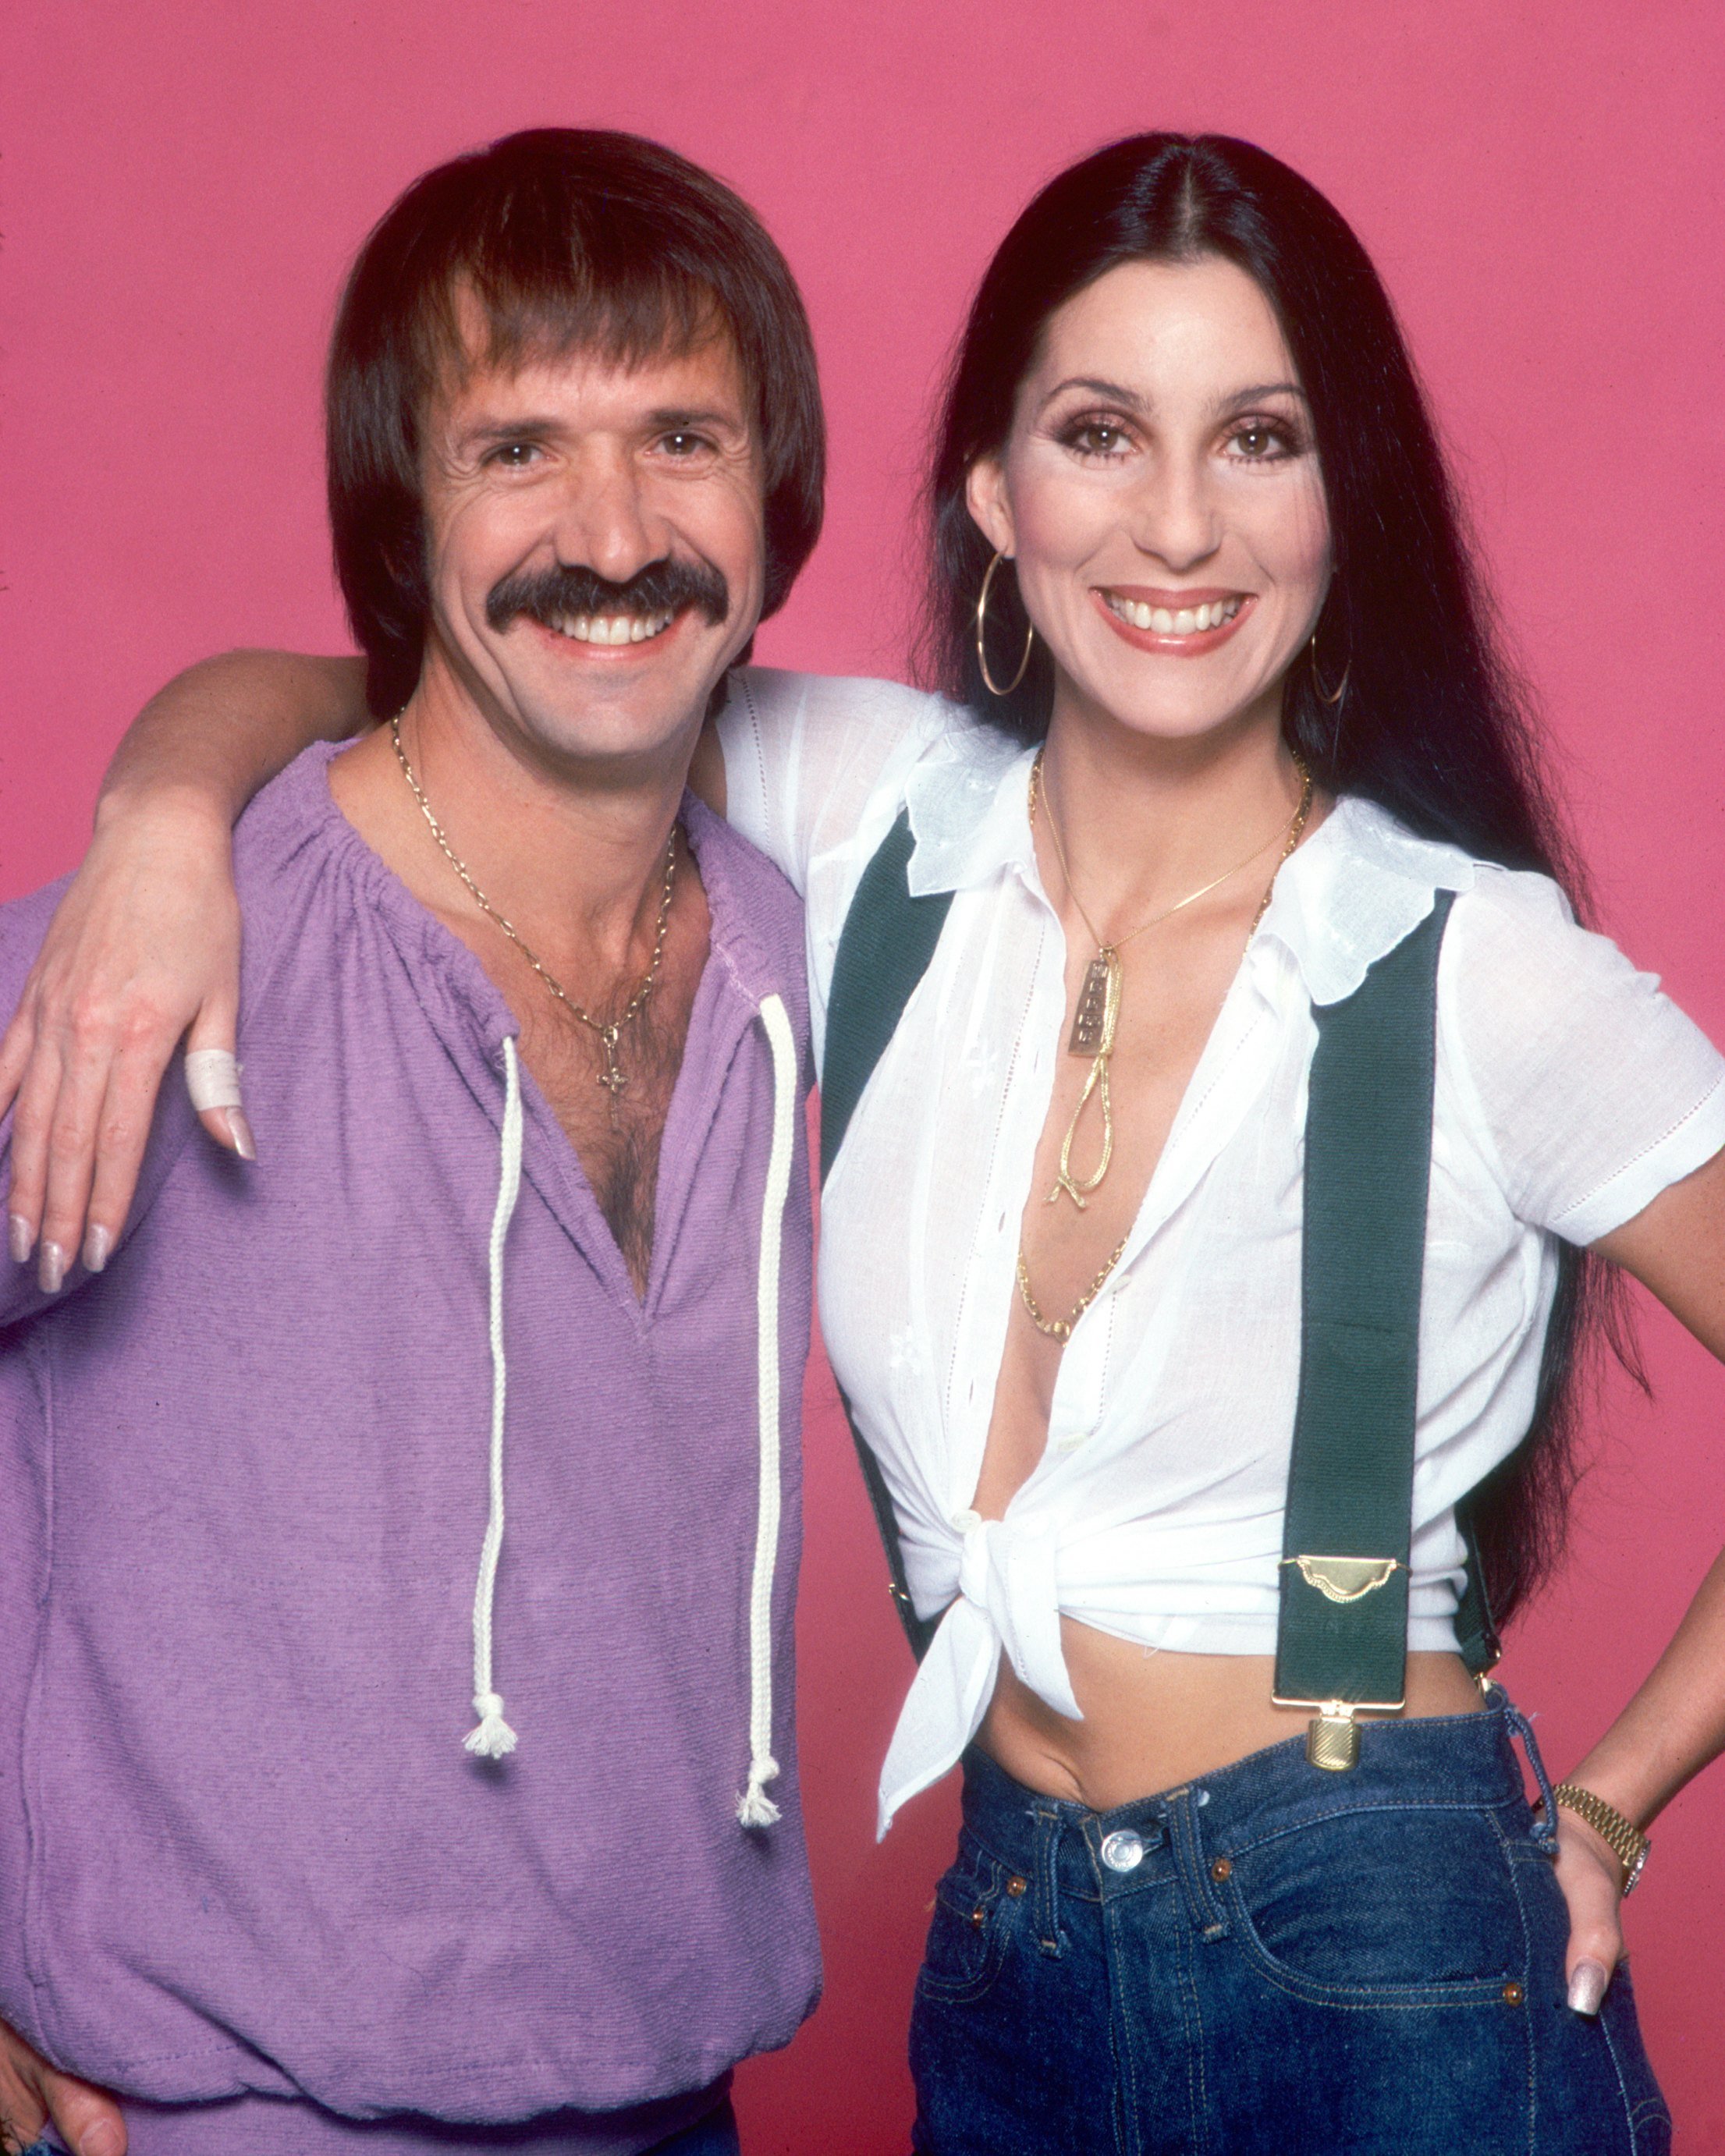 Singer and actress Cher poses with Sonny Bono for a photo session on July 22, 1977 in Los Angeles, California. | Source: Getty Images